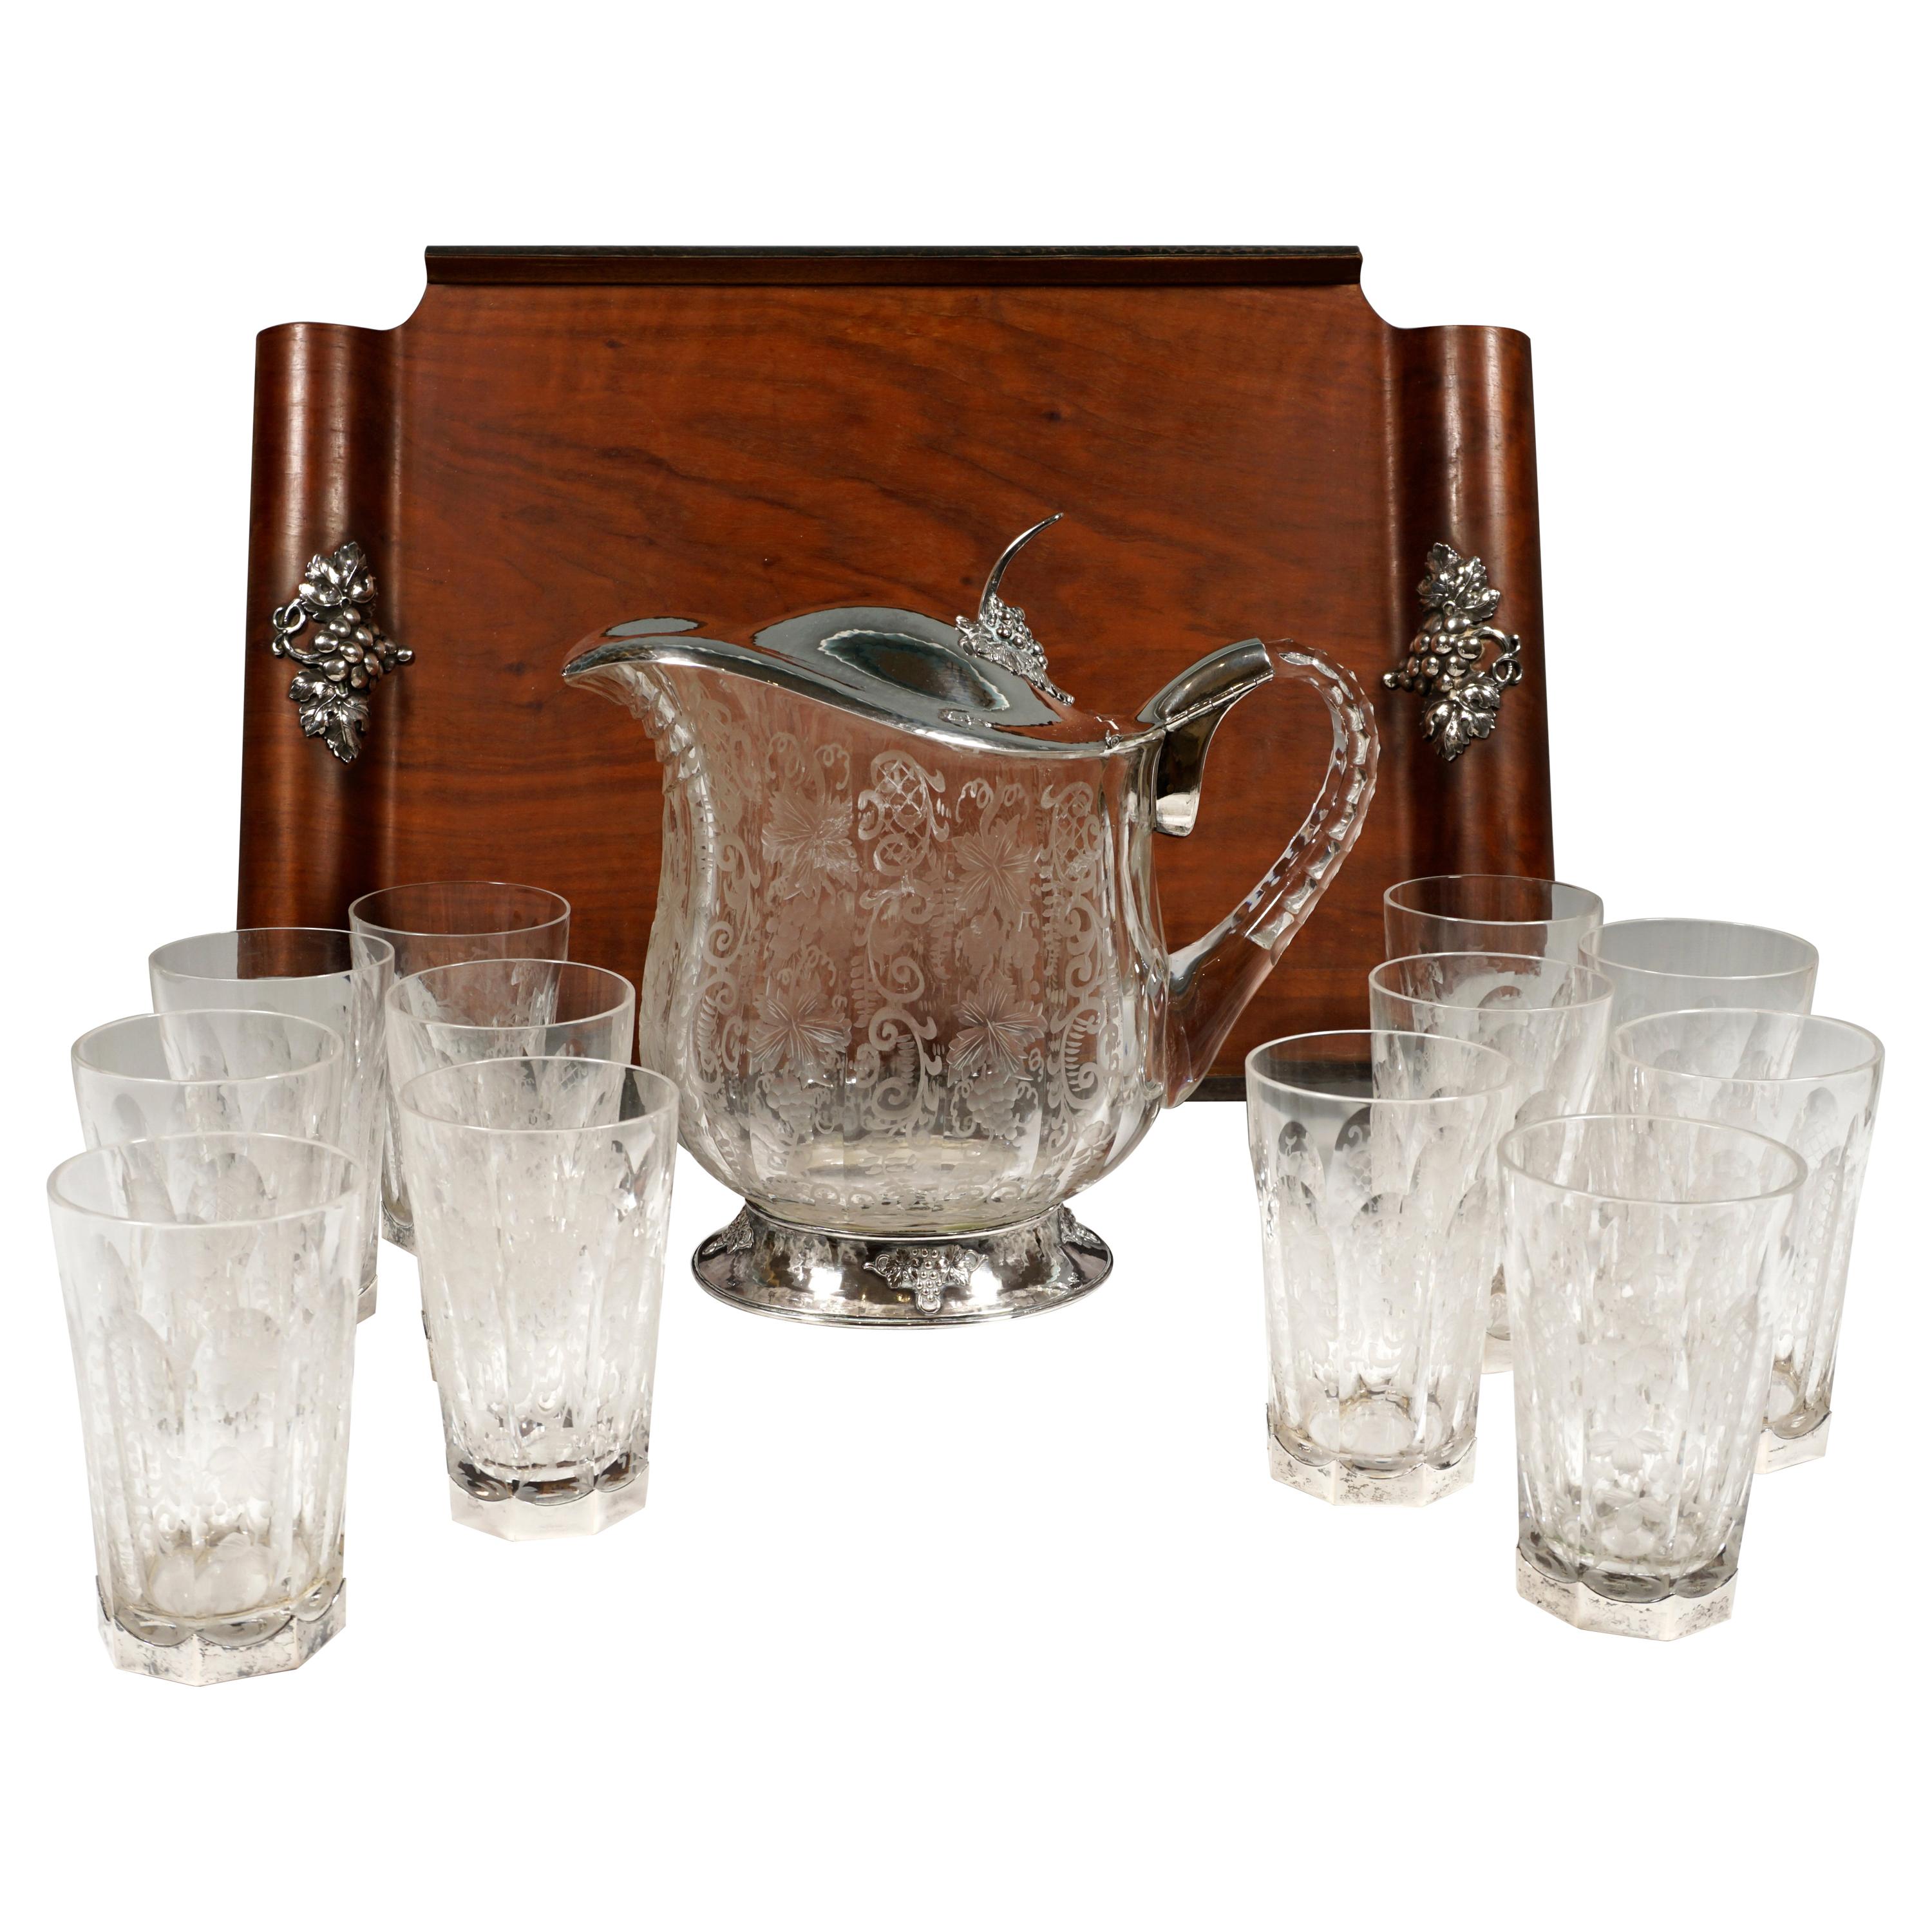 Chrystal Carafe and Twelve Glasses with Silver Mount on Tray Germany around 1900